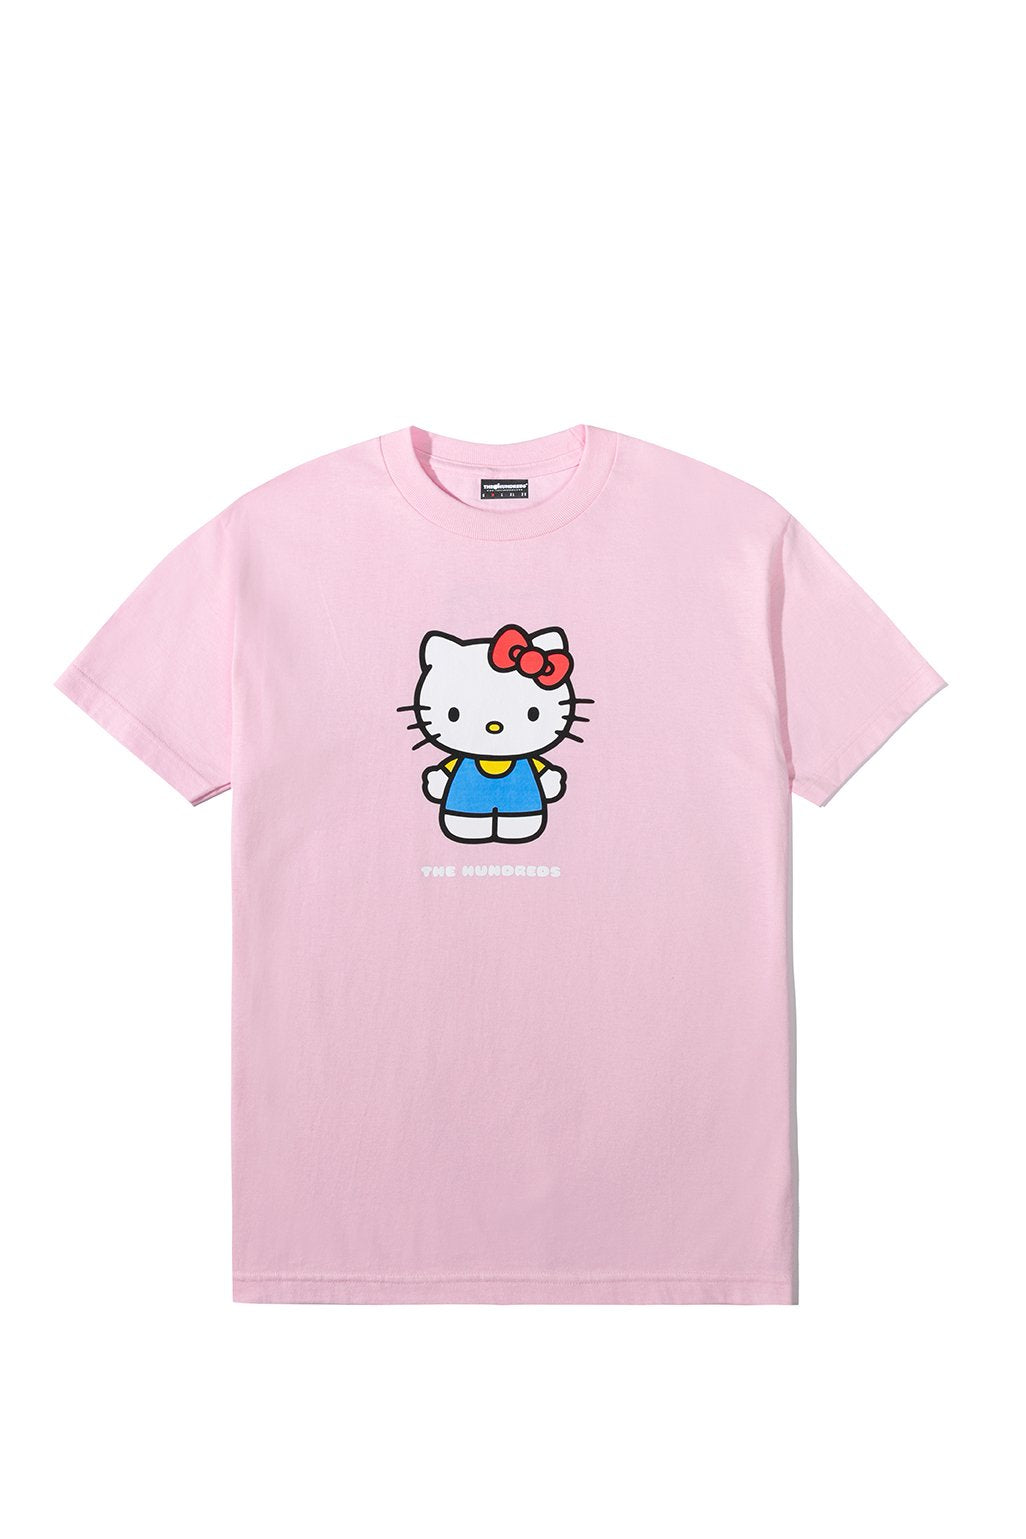 The Hundreds x Sanrio Kitty T-Shirt in Pink